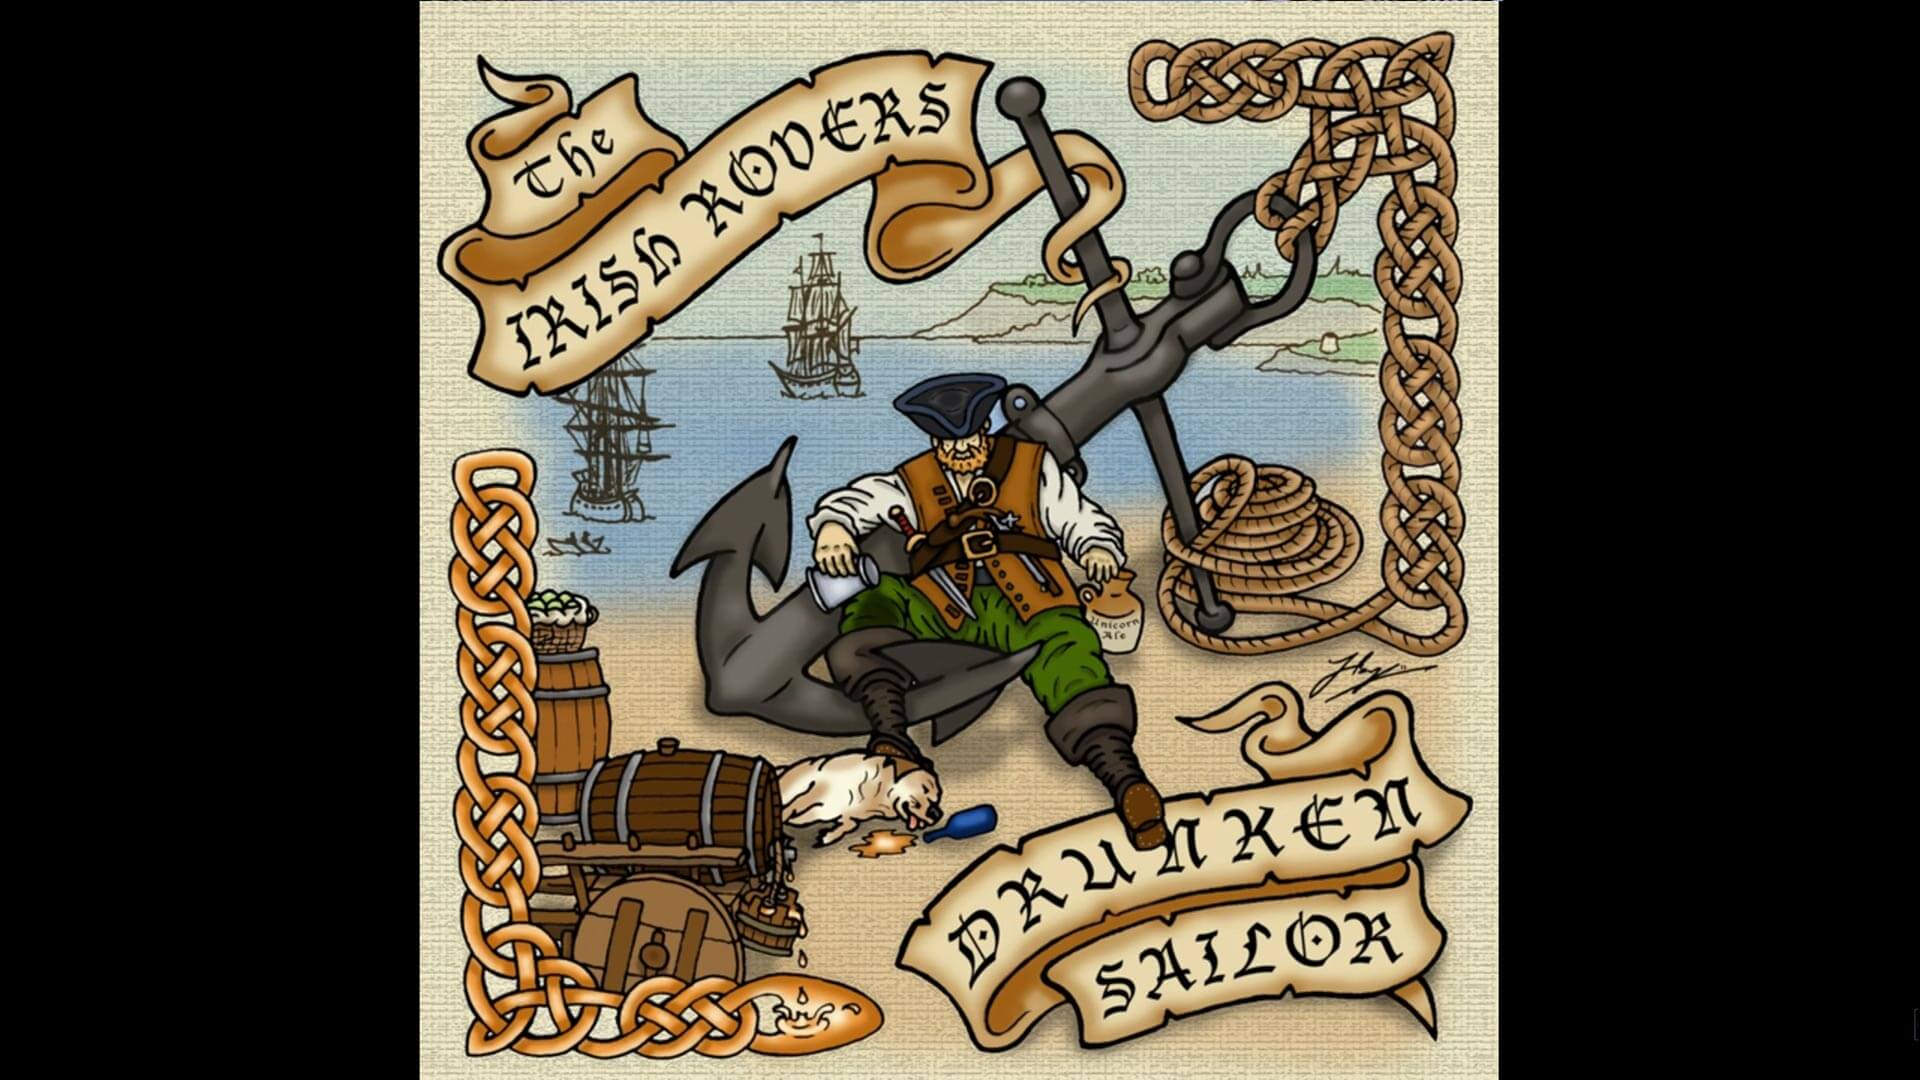 Video thumbnail of Drunken Sailor song by the Irish Rovers.